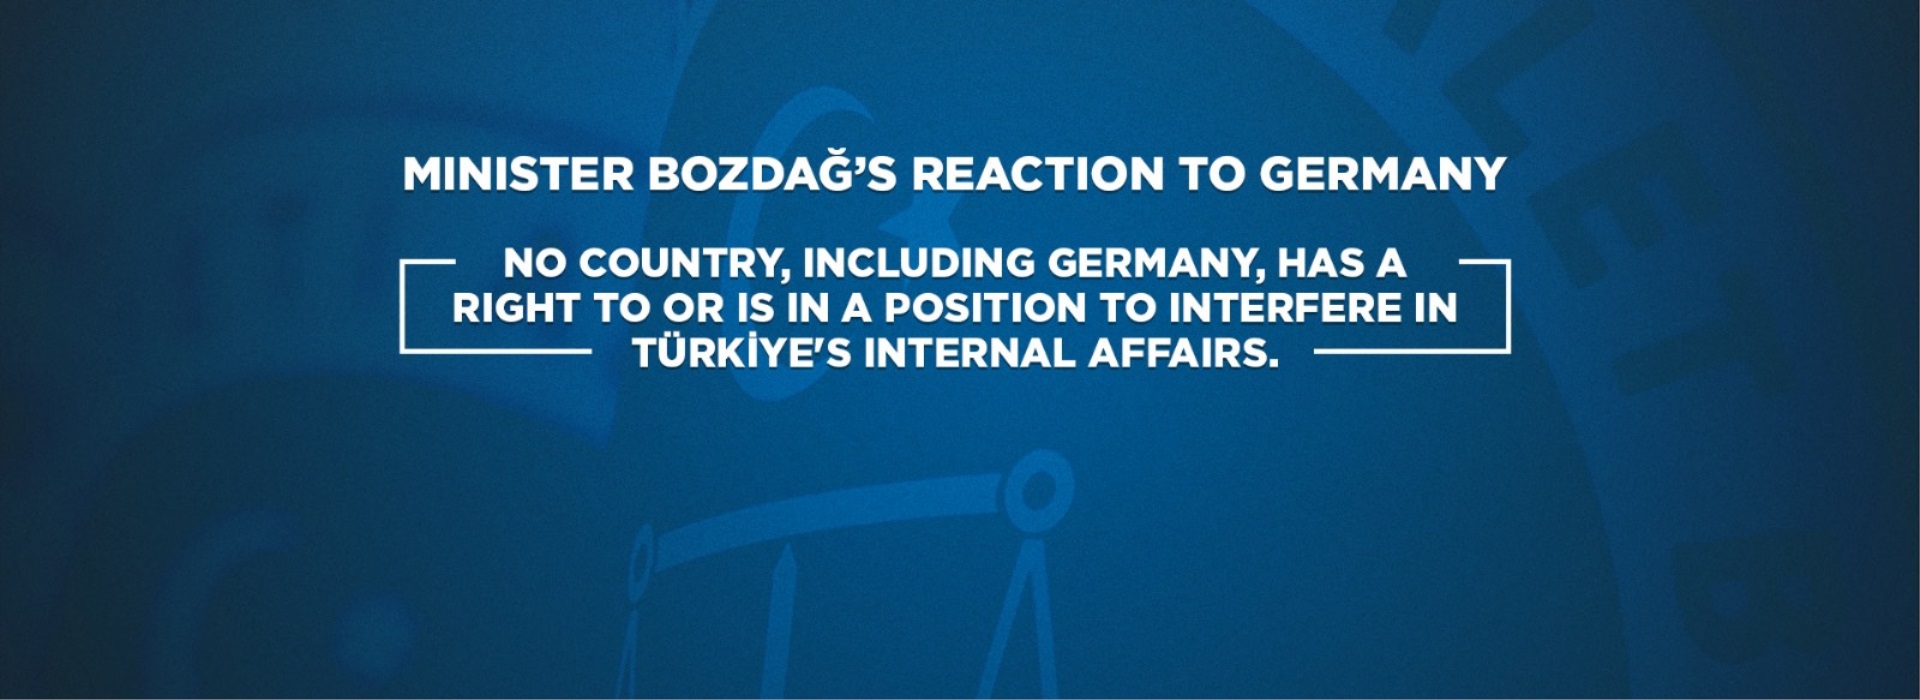 BOZDAĞ: TURKISH JUDGES DELIVER JUDGMENTS ACCORDING TO THEIR CONSCIENCE AND IN LINE WITH THE LEGISLATION AND LAW